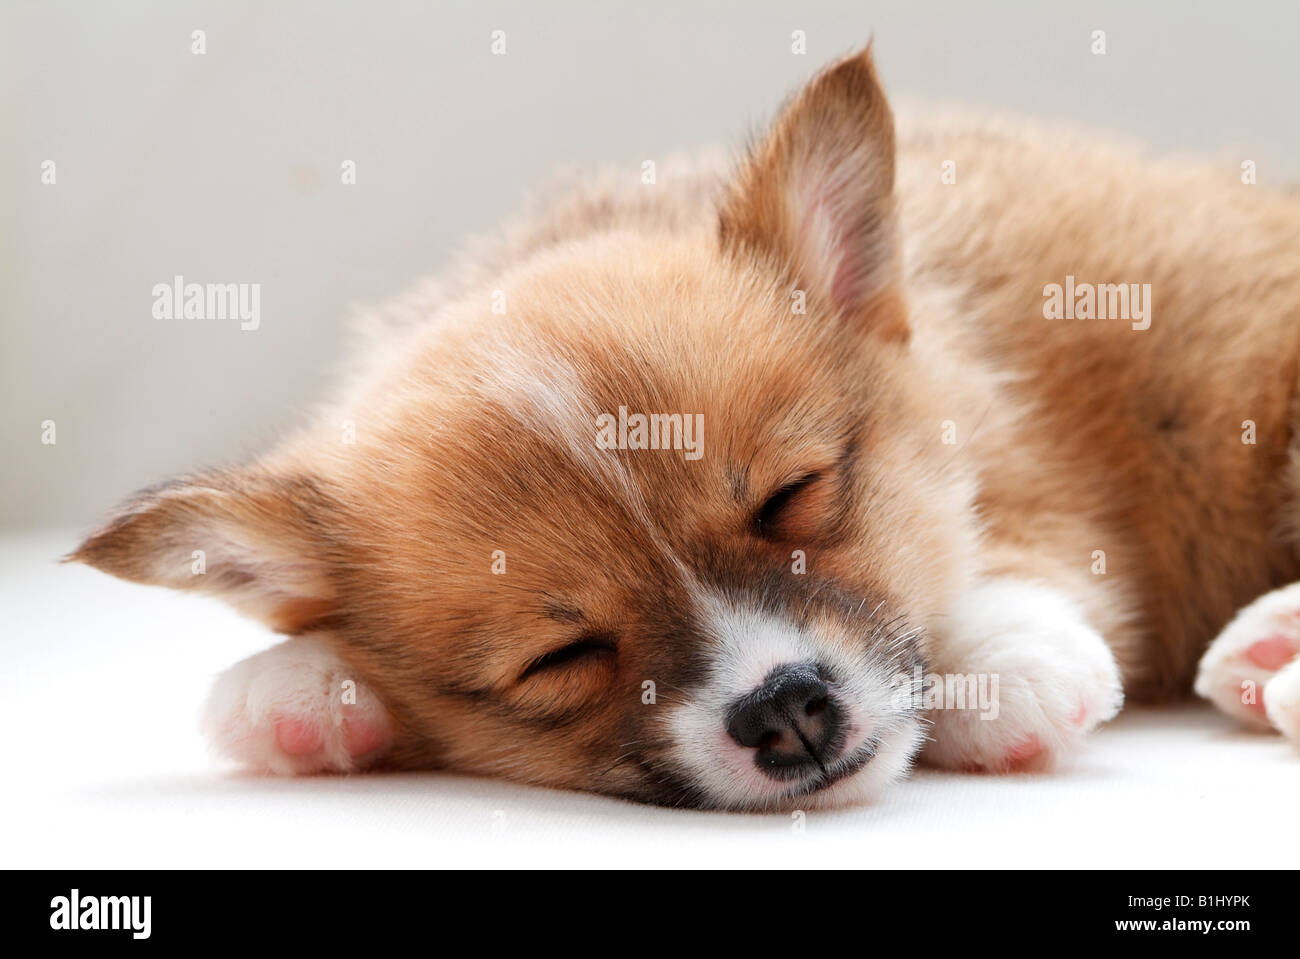 Close Up Of A Pembroke Welsh Corgi Puppy Sleeping On The Floor Stock Photo Alamy